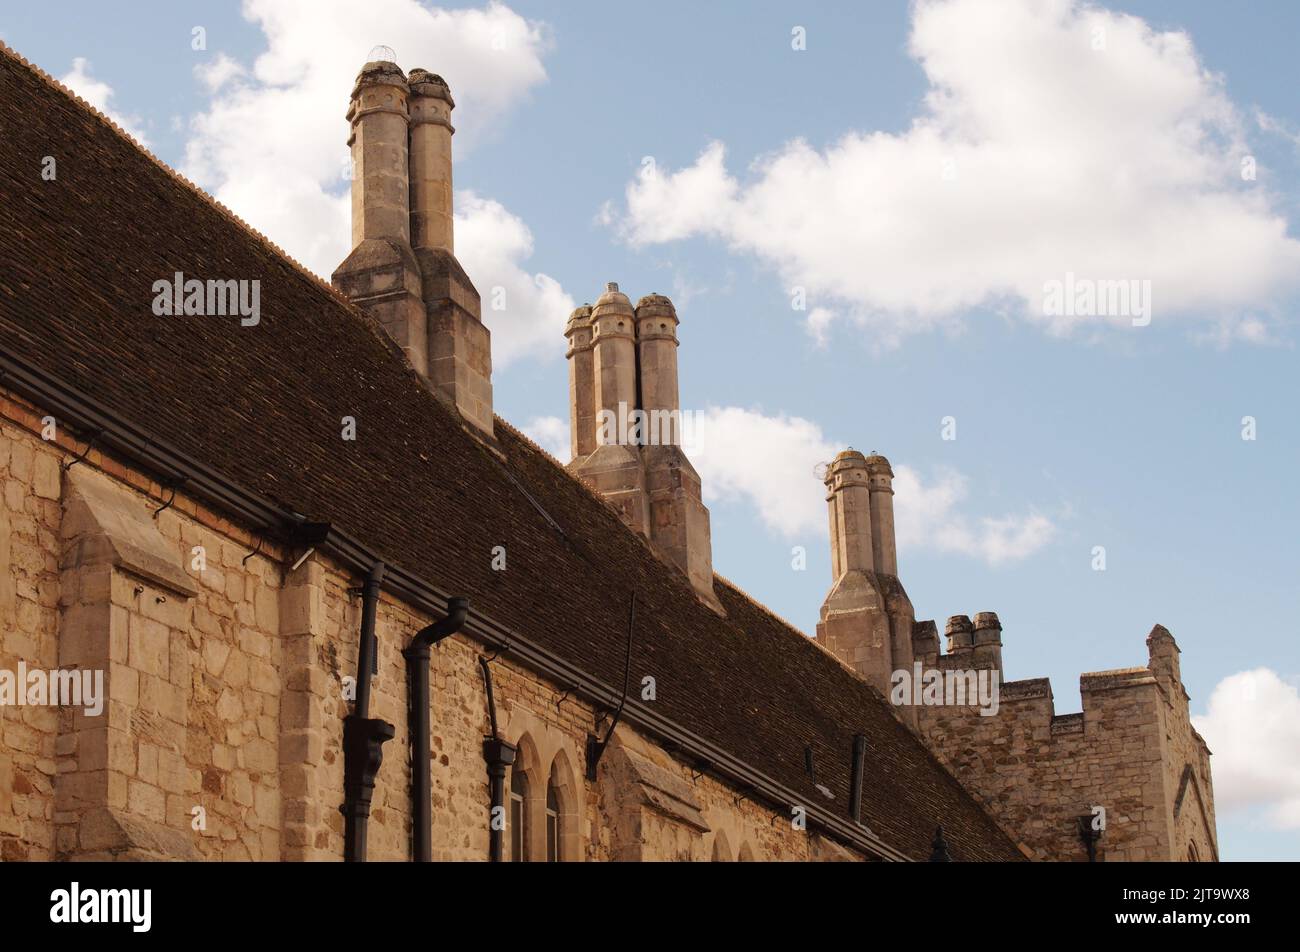 A view of architectural Tudor chimney stacks in Ely town centre, Cambridgeshire, showing the historical side of the city Stock Photo